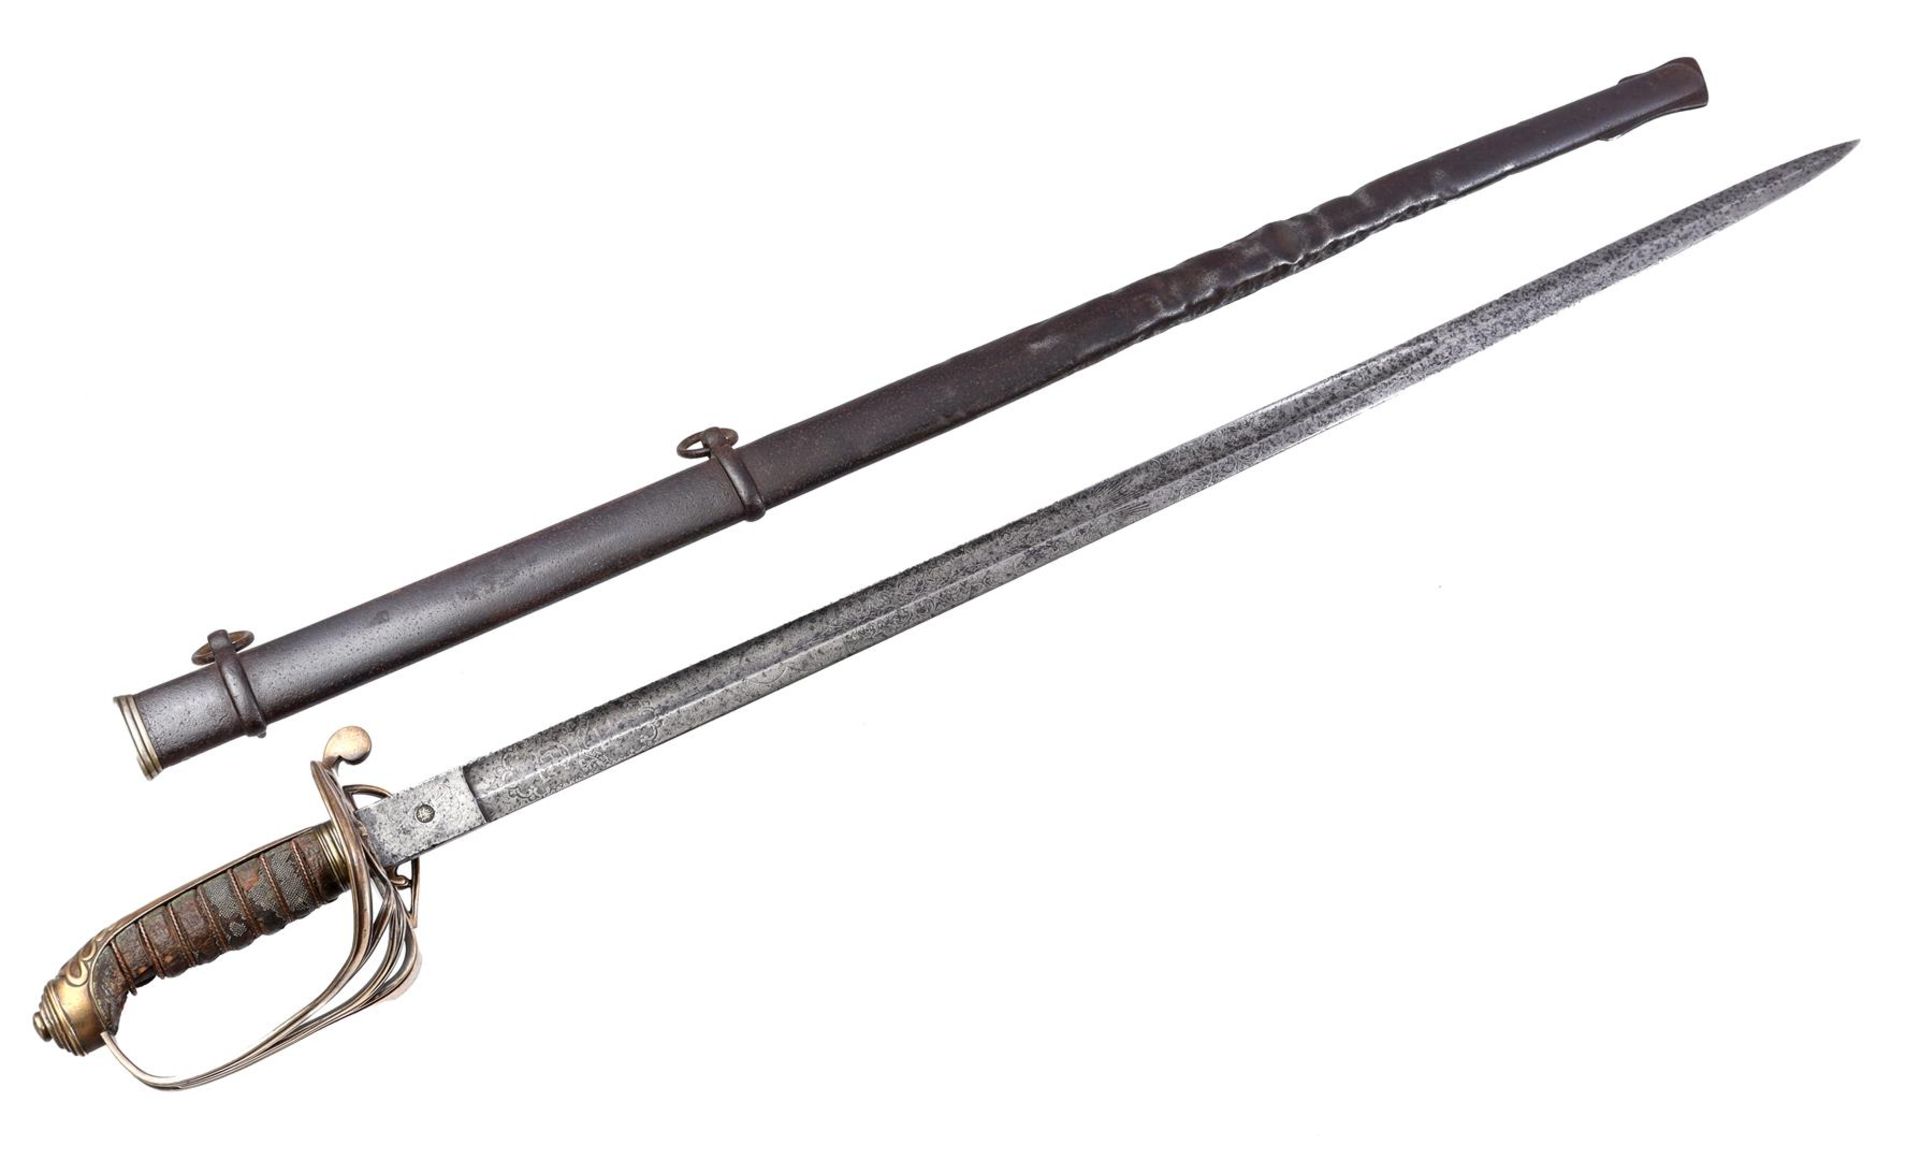 English cavalry officer's saber